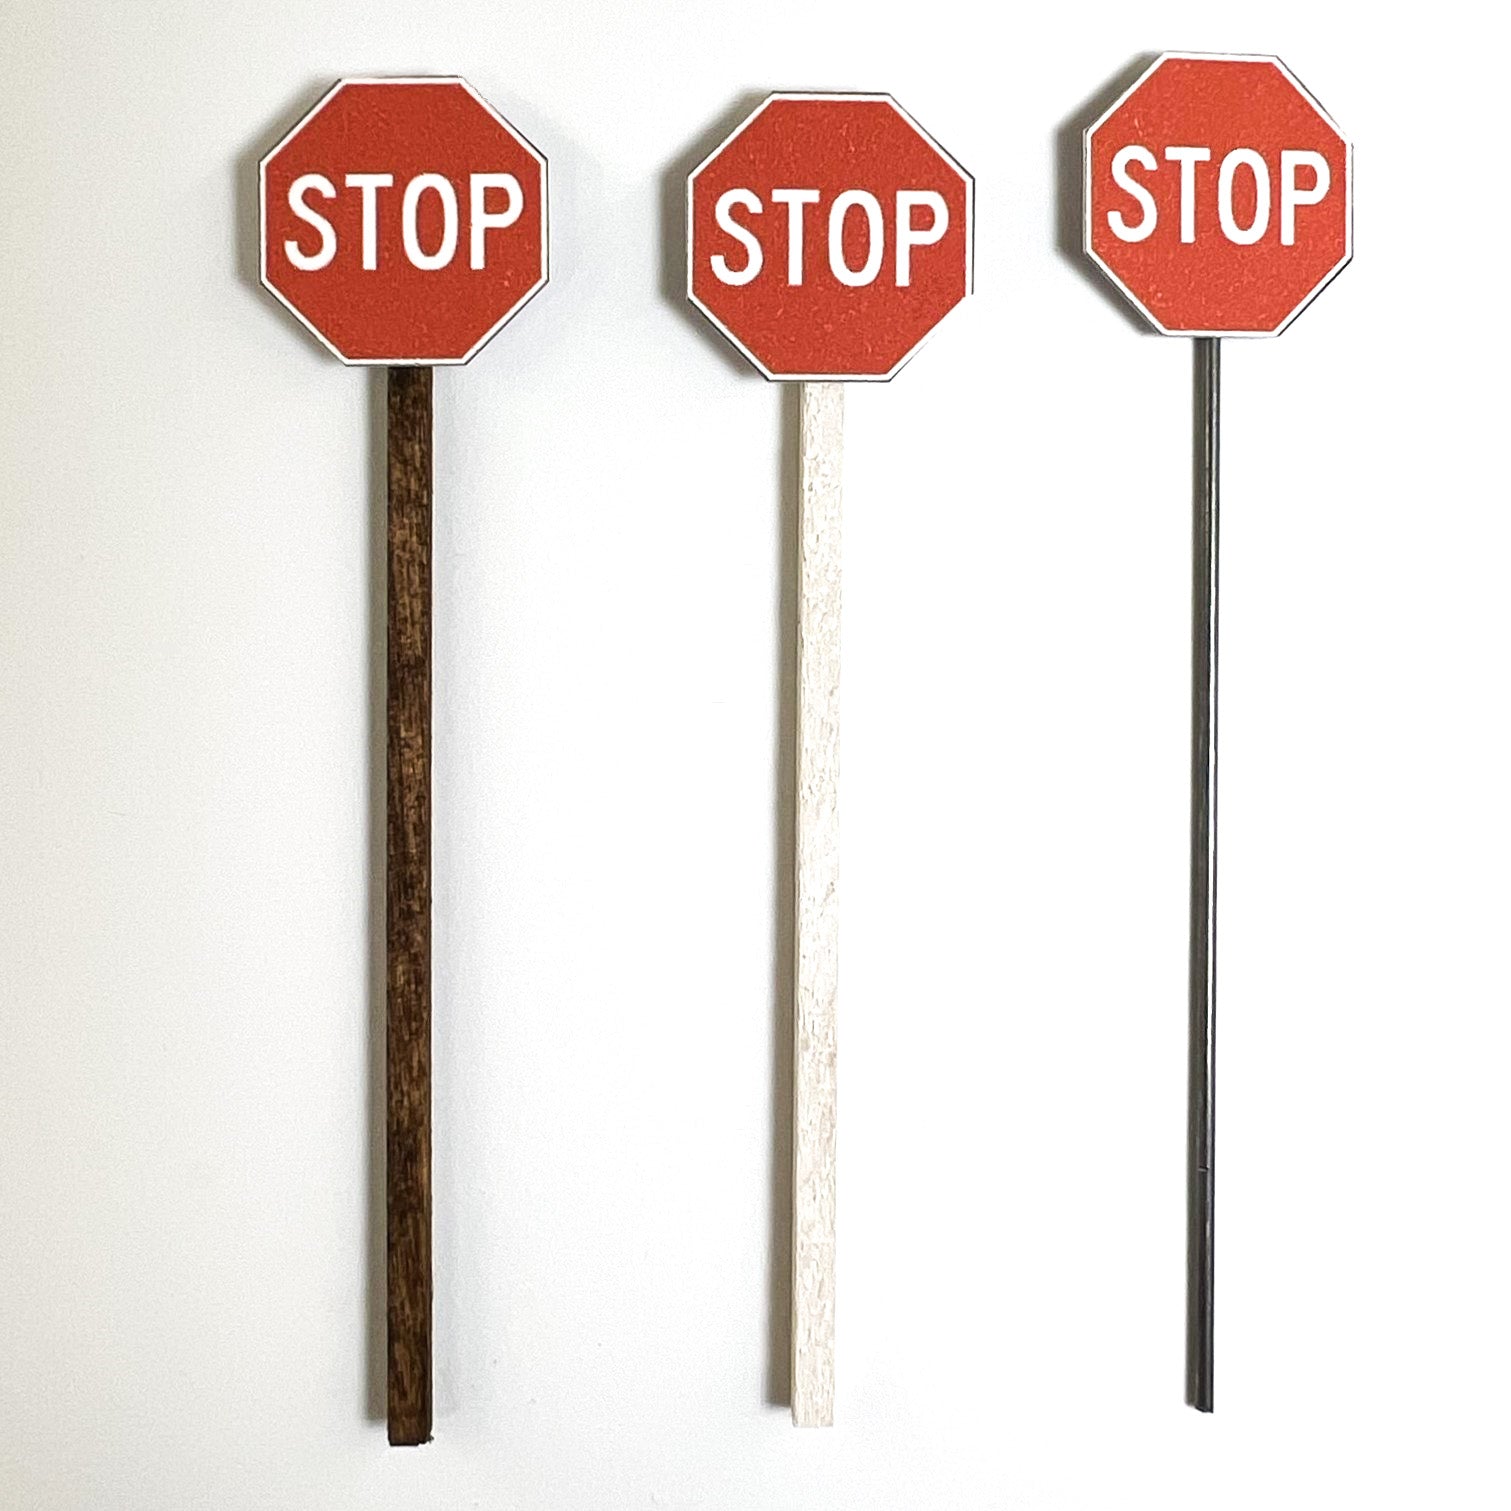 Model Railroad Stop Sign Red Octagon White lettering, brown wood, white wood or metal pole